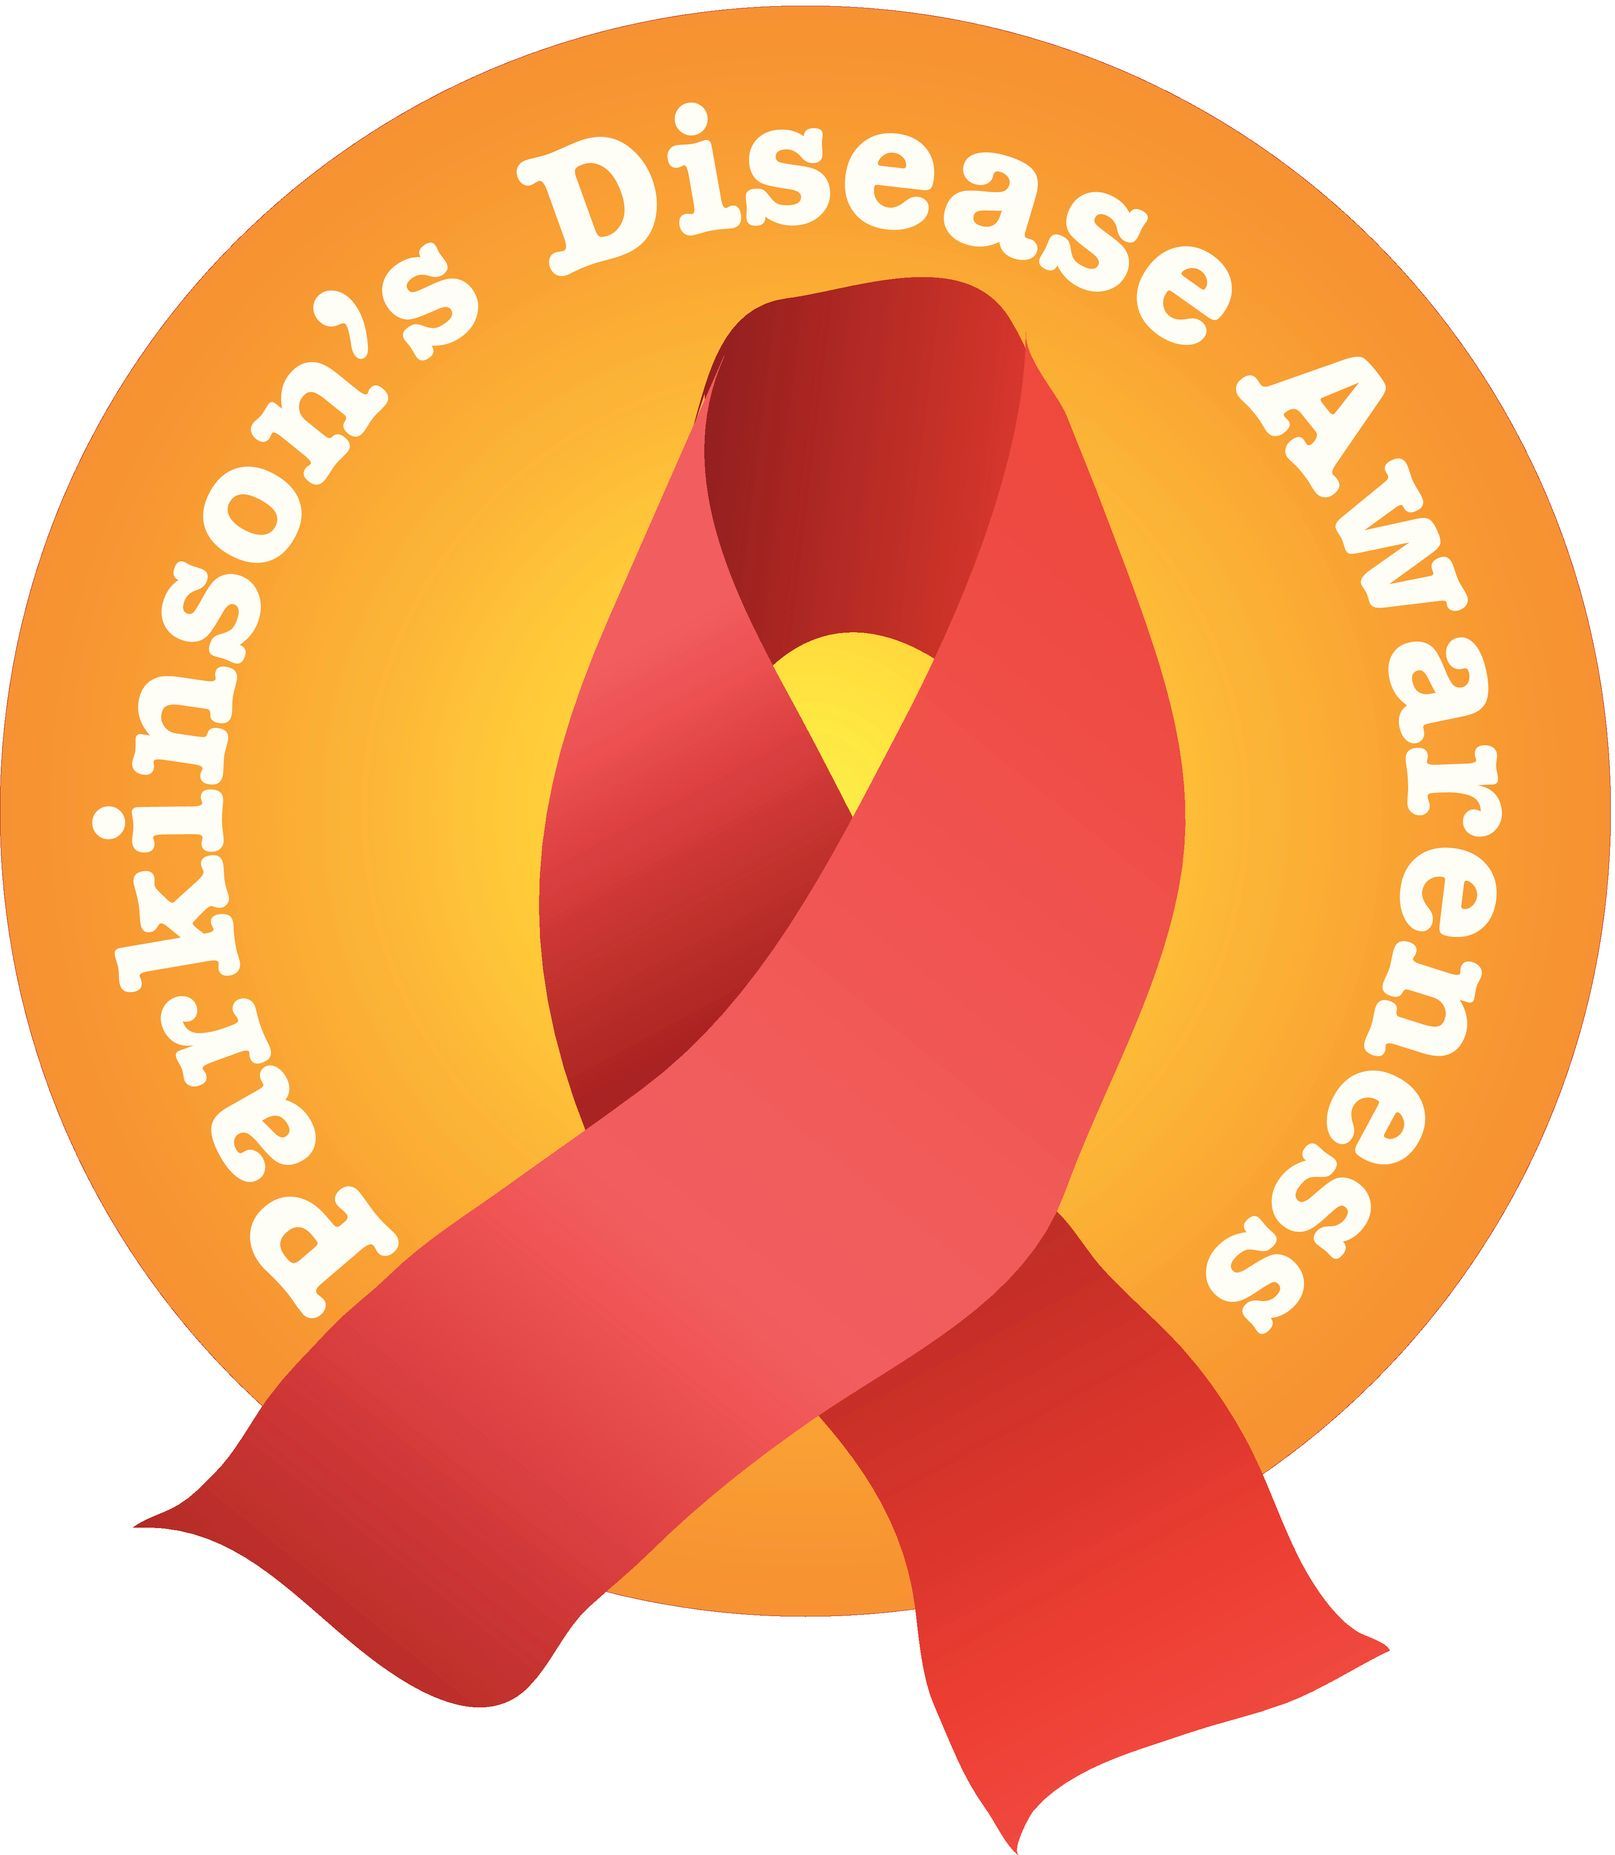 A logo for parkinson 's disease awareness with a red ribbon